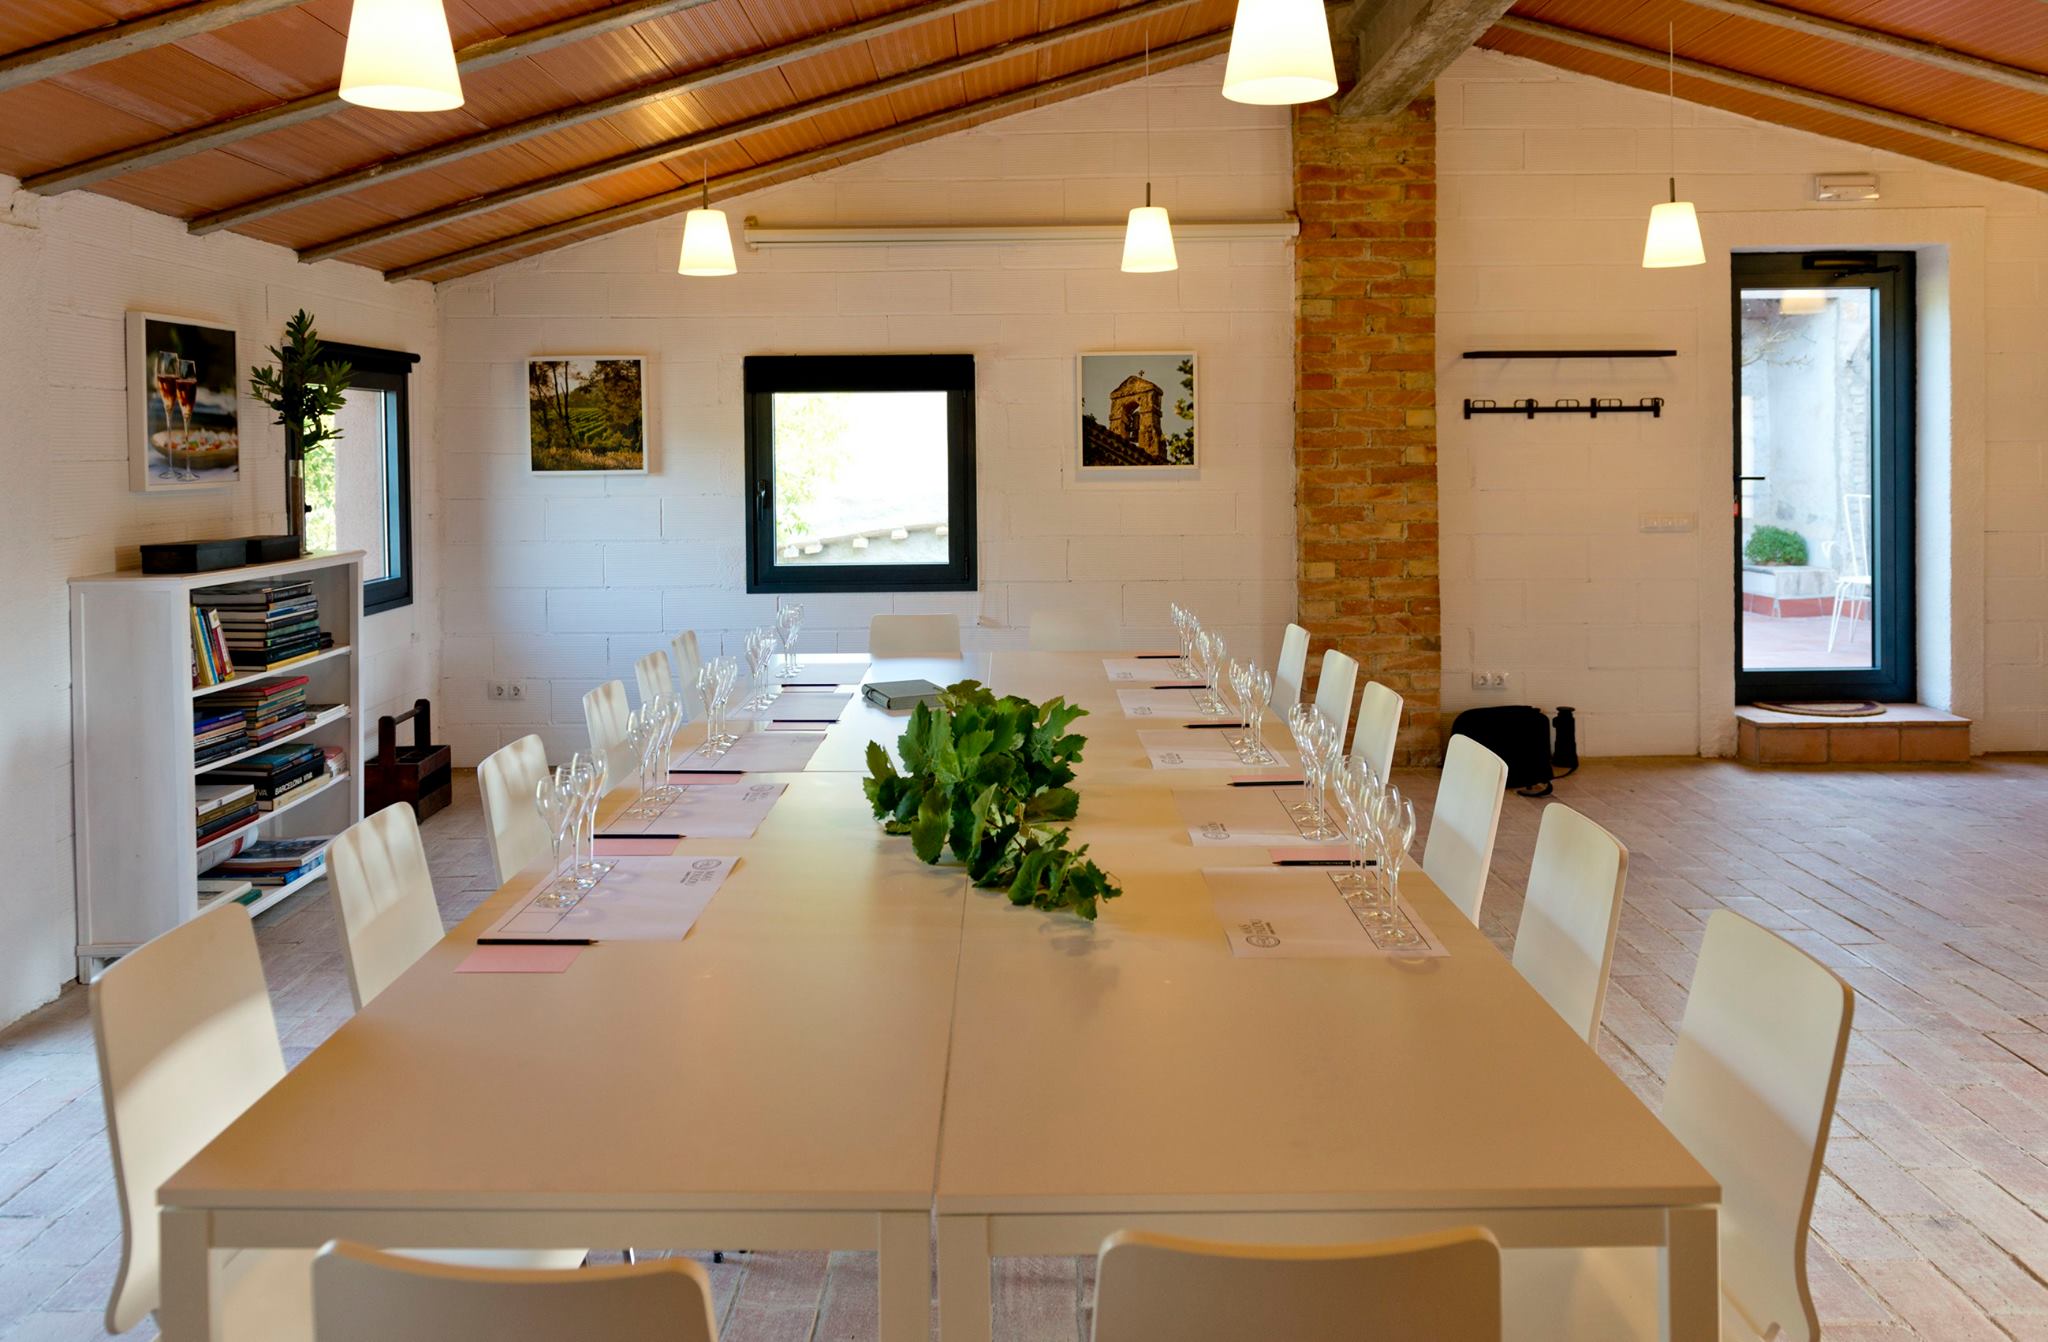 Large meeting table for conference or dinner